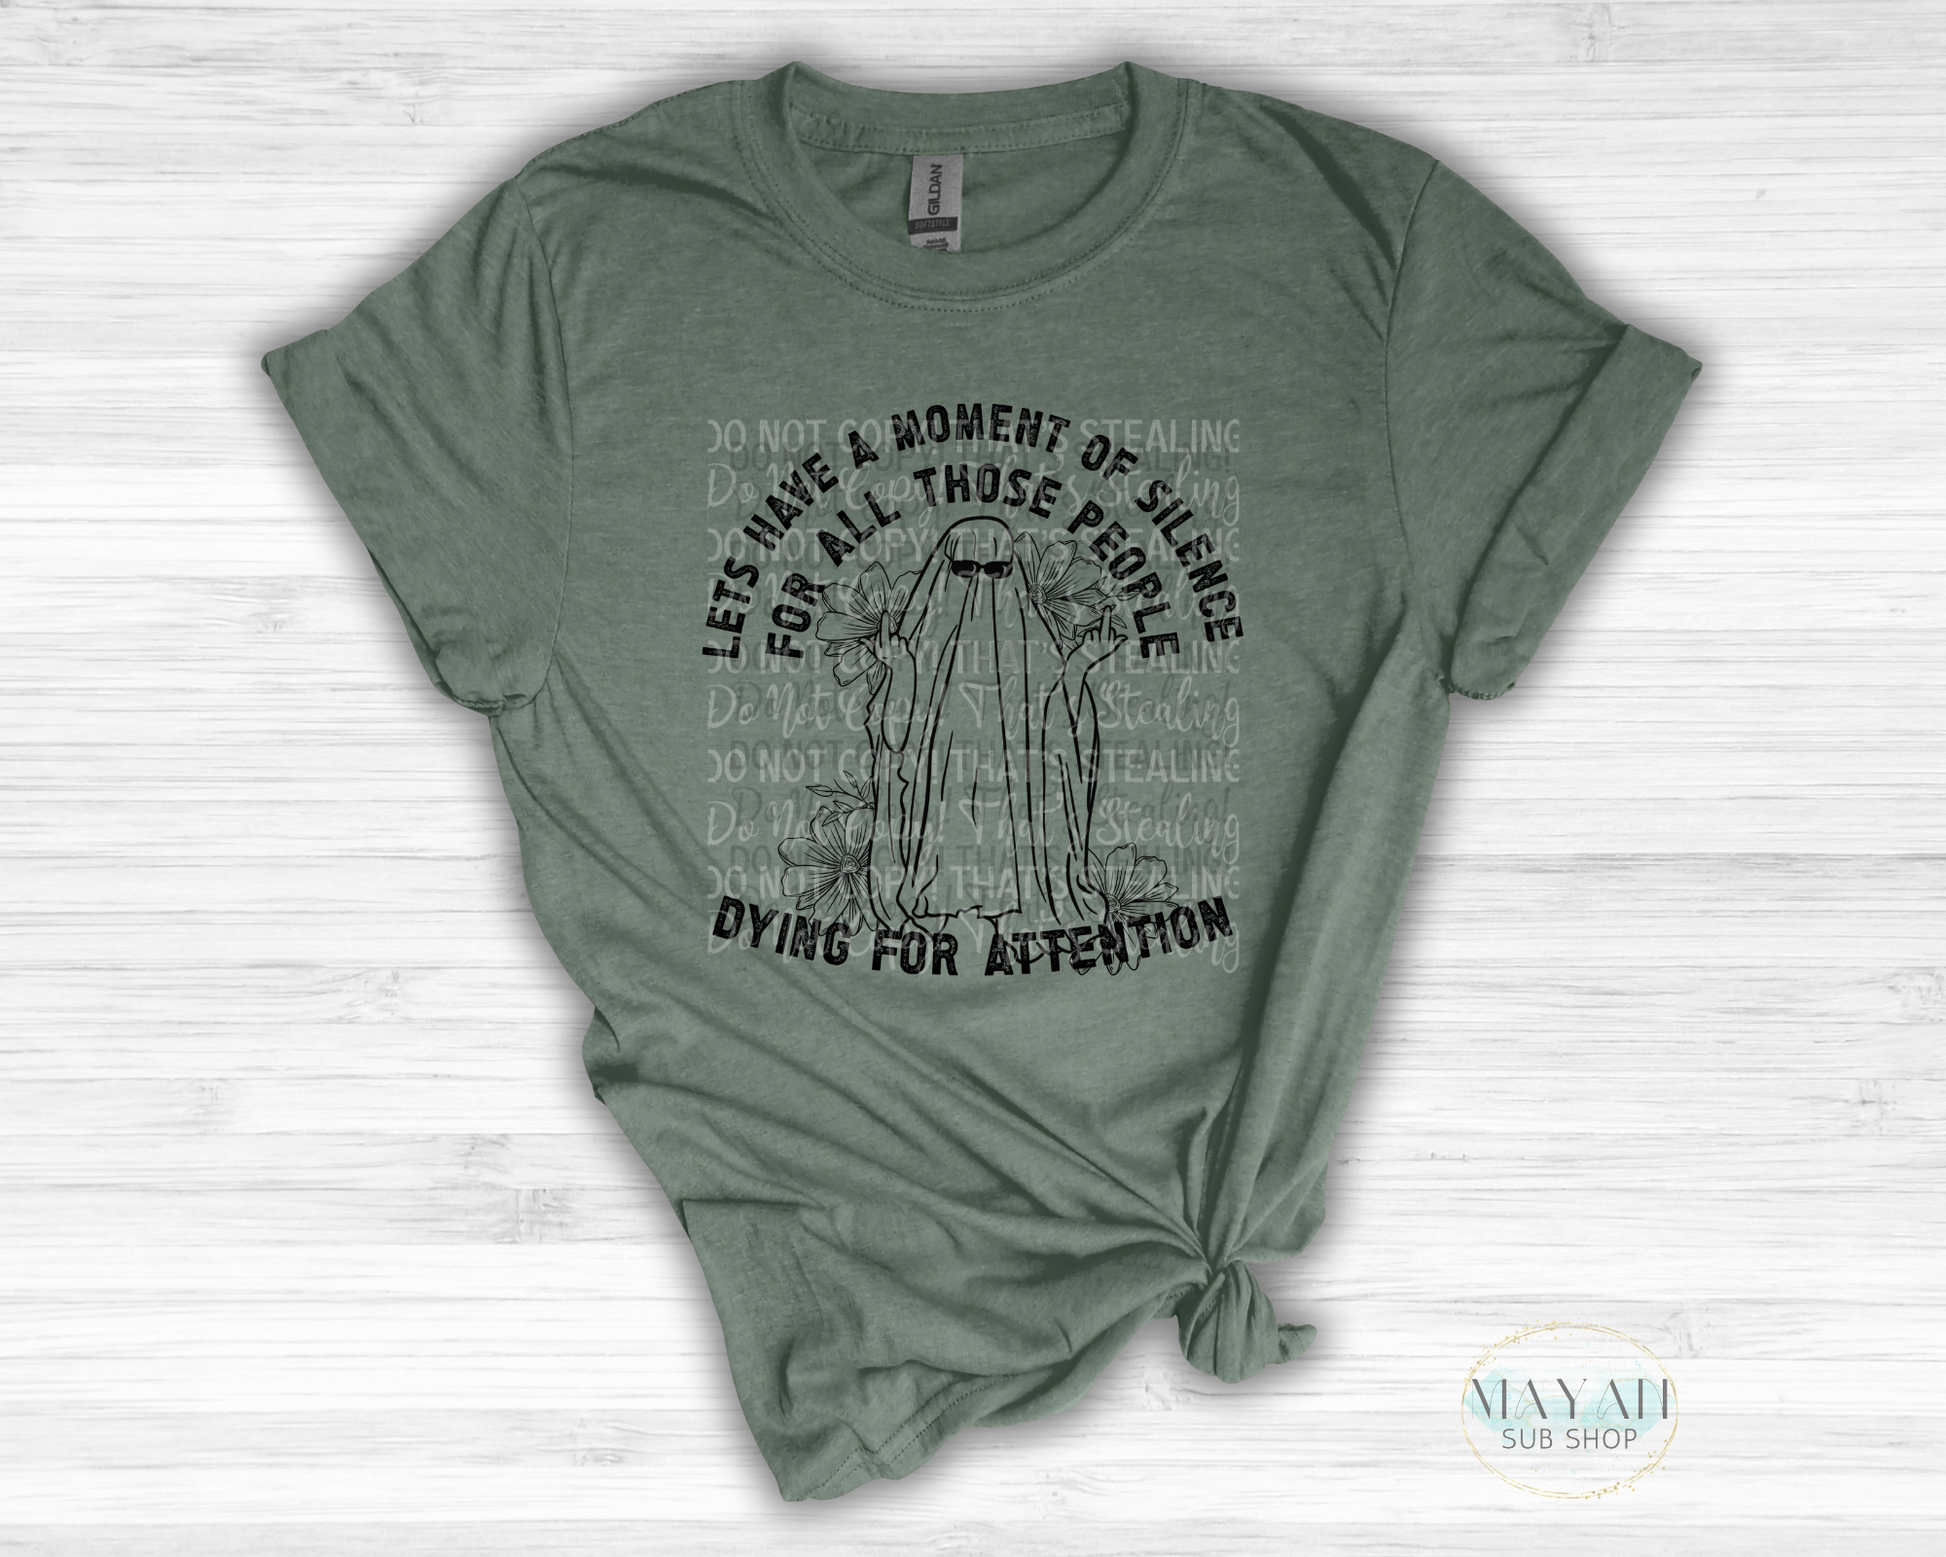 Dying for attention in heather military green shirt. -Mayan Sub Shop